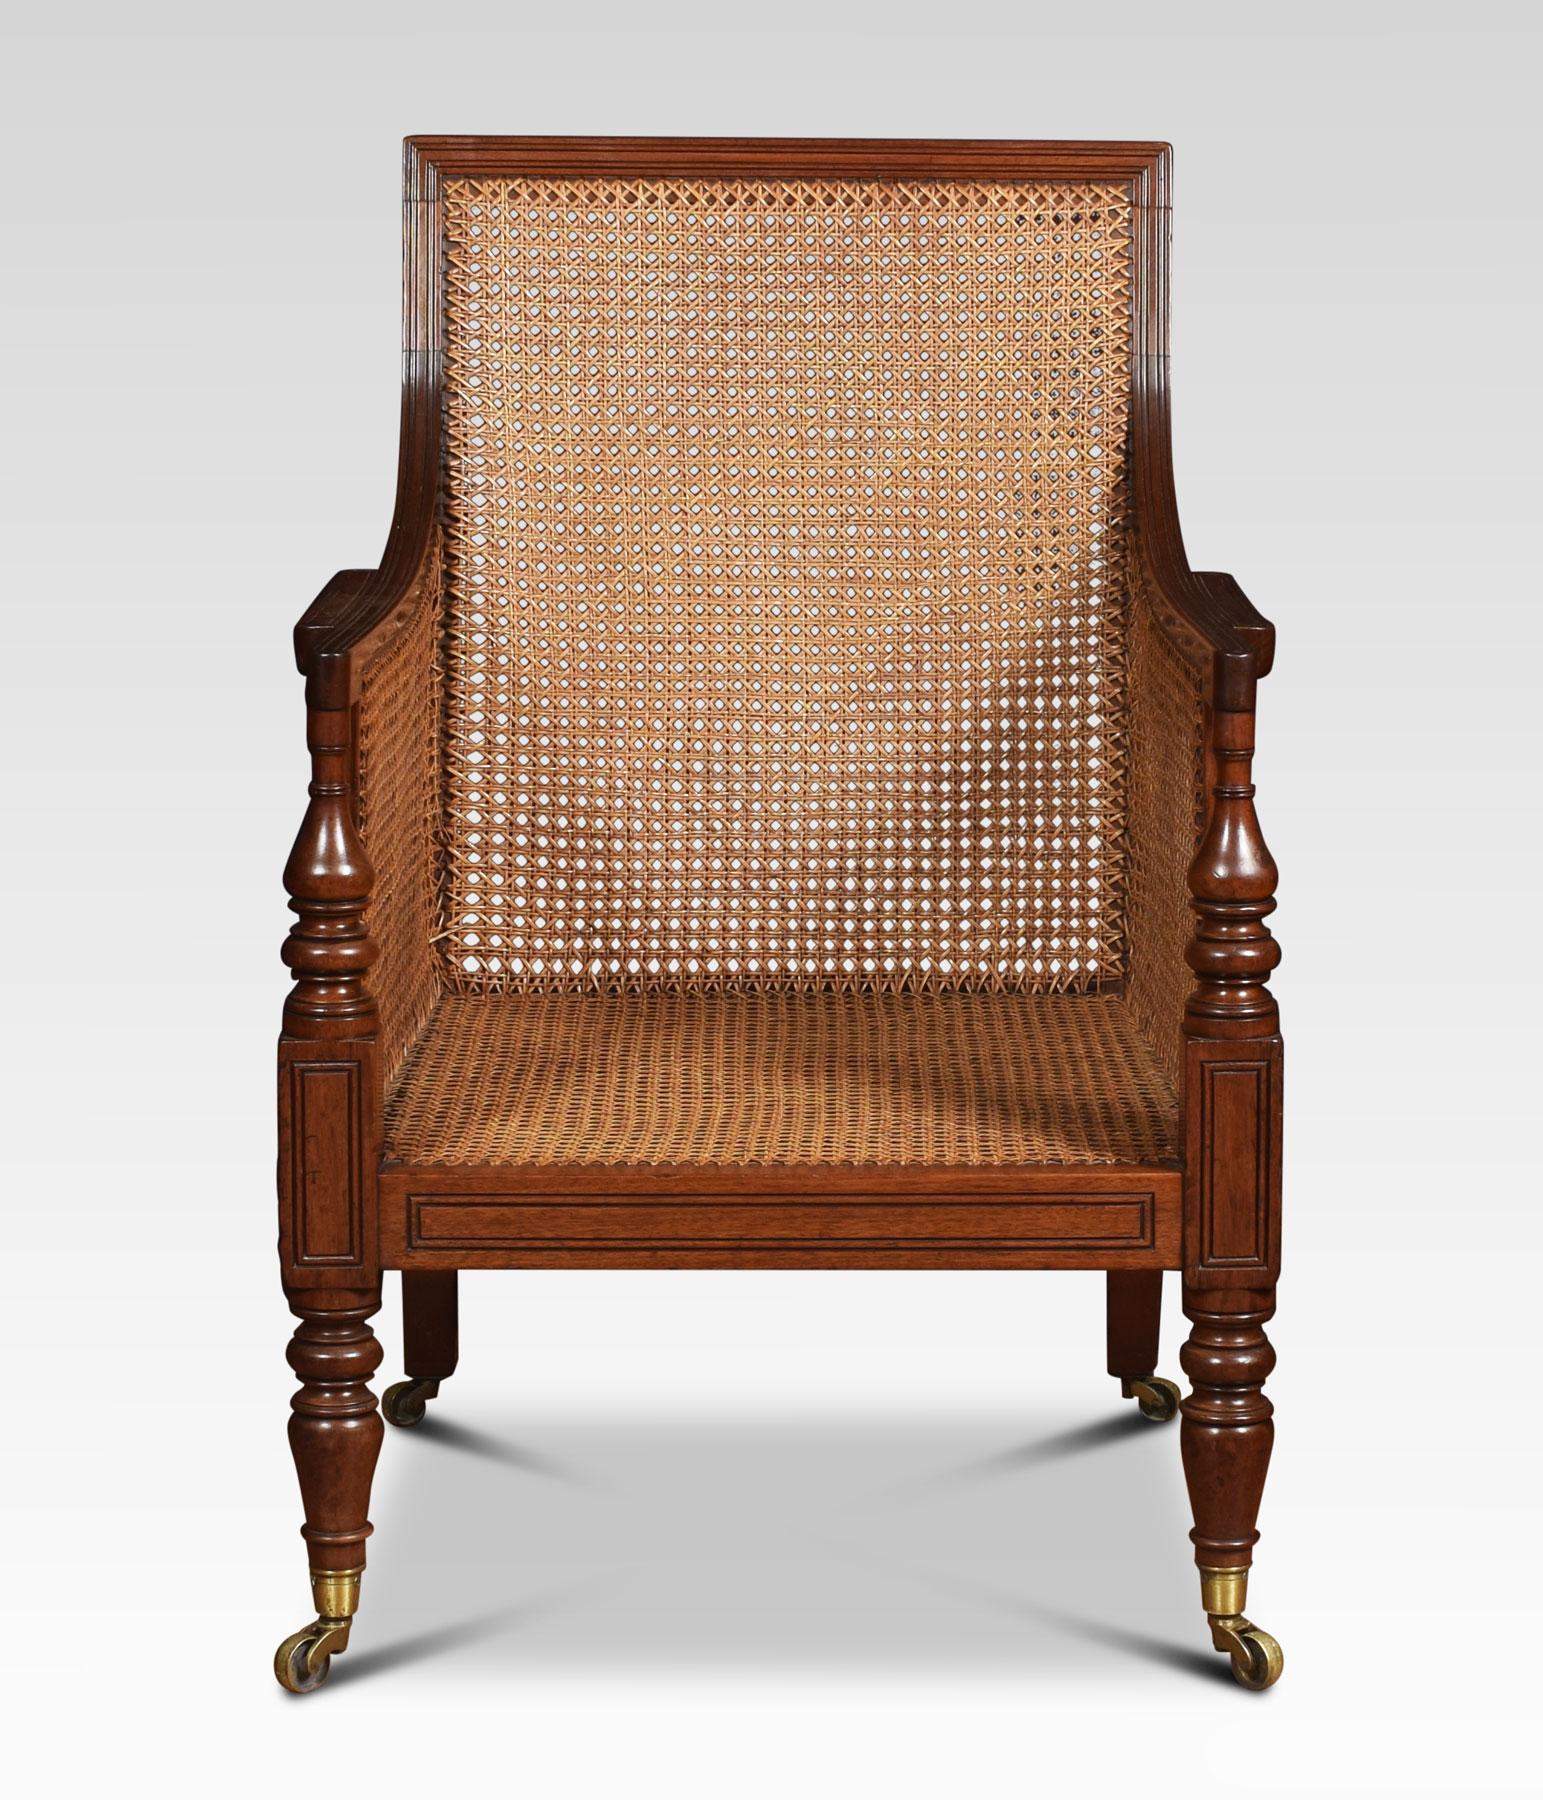 19th century bergere armchair, the solid mahogany frame and inset cane back and arms, above removable burgundy leather cushions. Raised up on turned tapering front legs terminating is castors.
Dimensions:
Height 38 inches height to seat 16.5